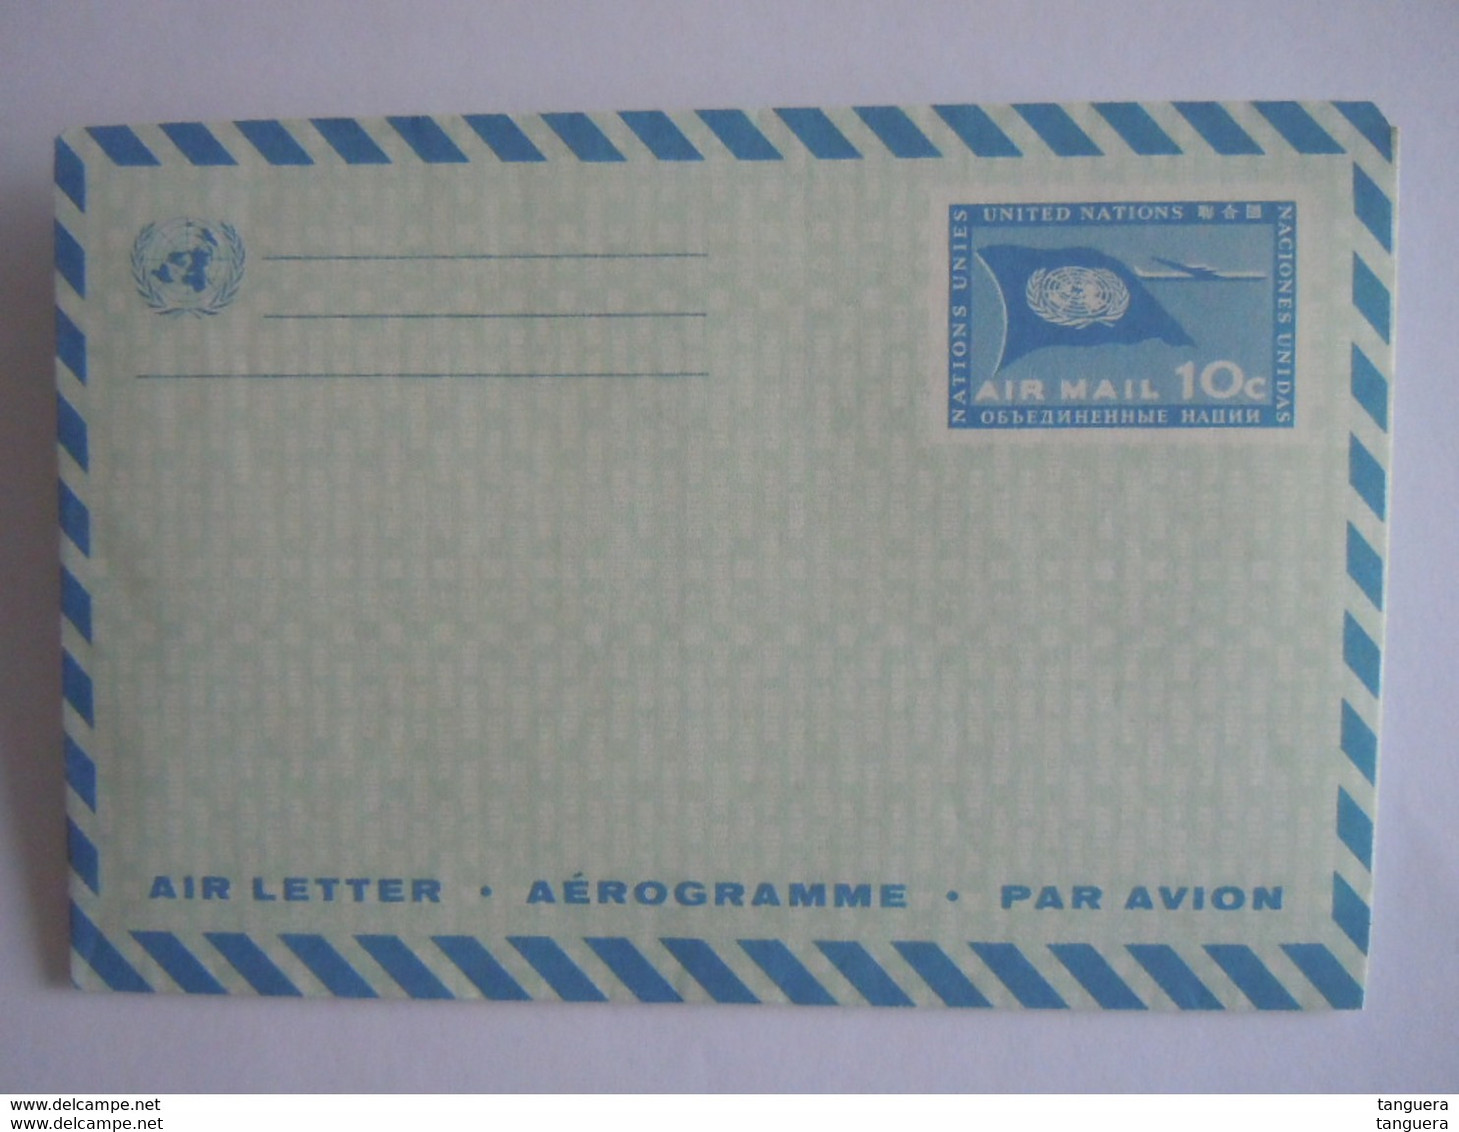 UN UNO United Nations New York Aerogramme Stationery Entier Postal Air Letter Flag 10c Mint - Airmail